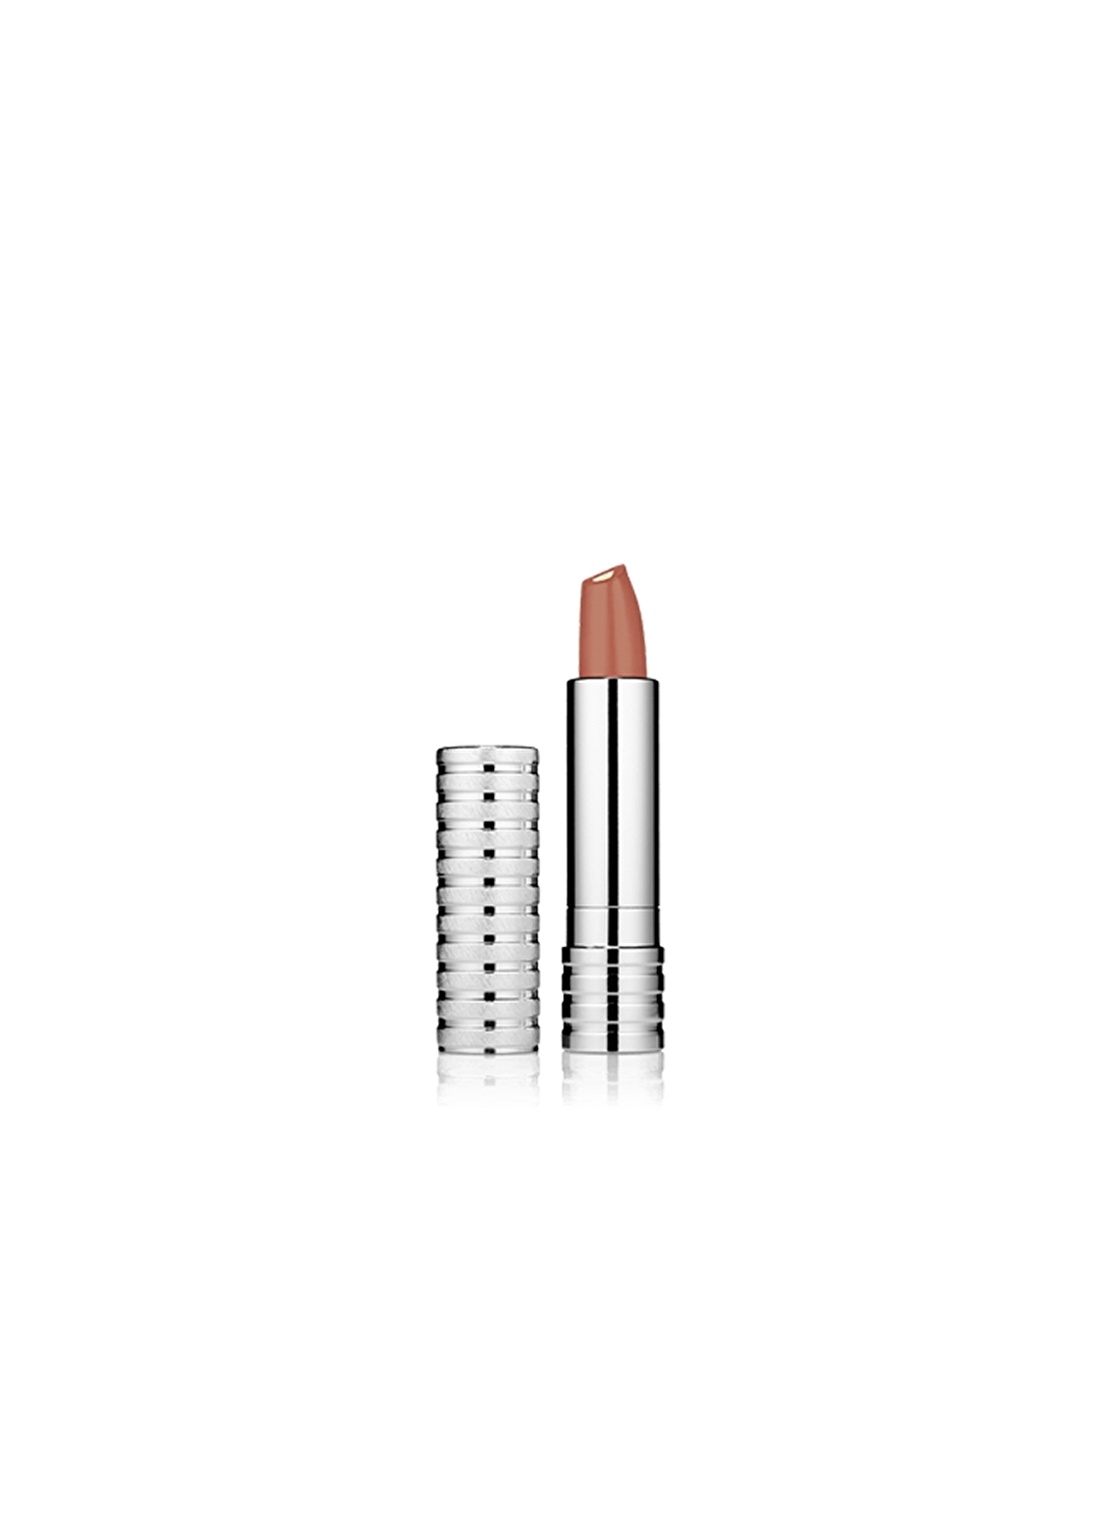 Clinique Dramatically Different Lipstick Ruj - 04 Canoodle 4G